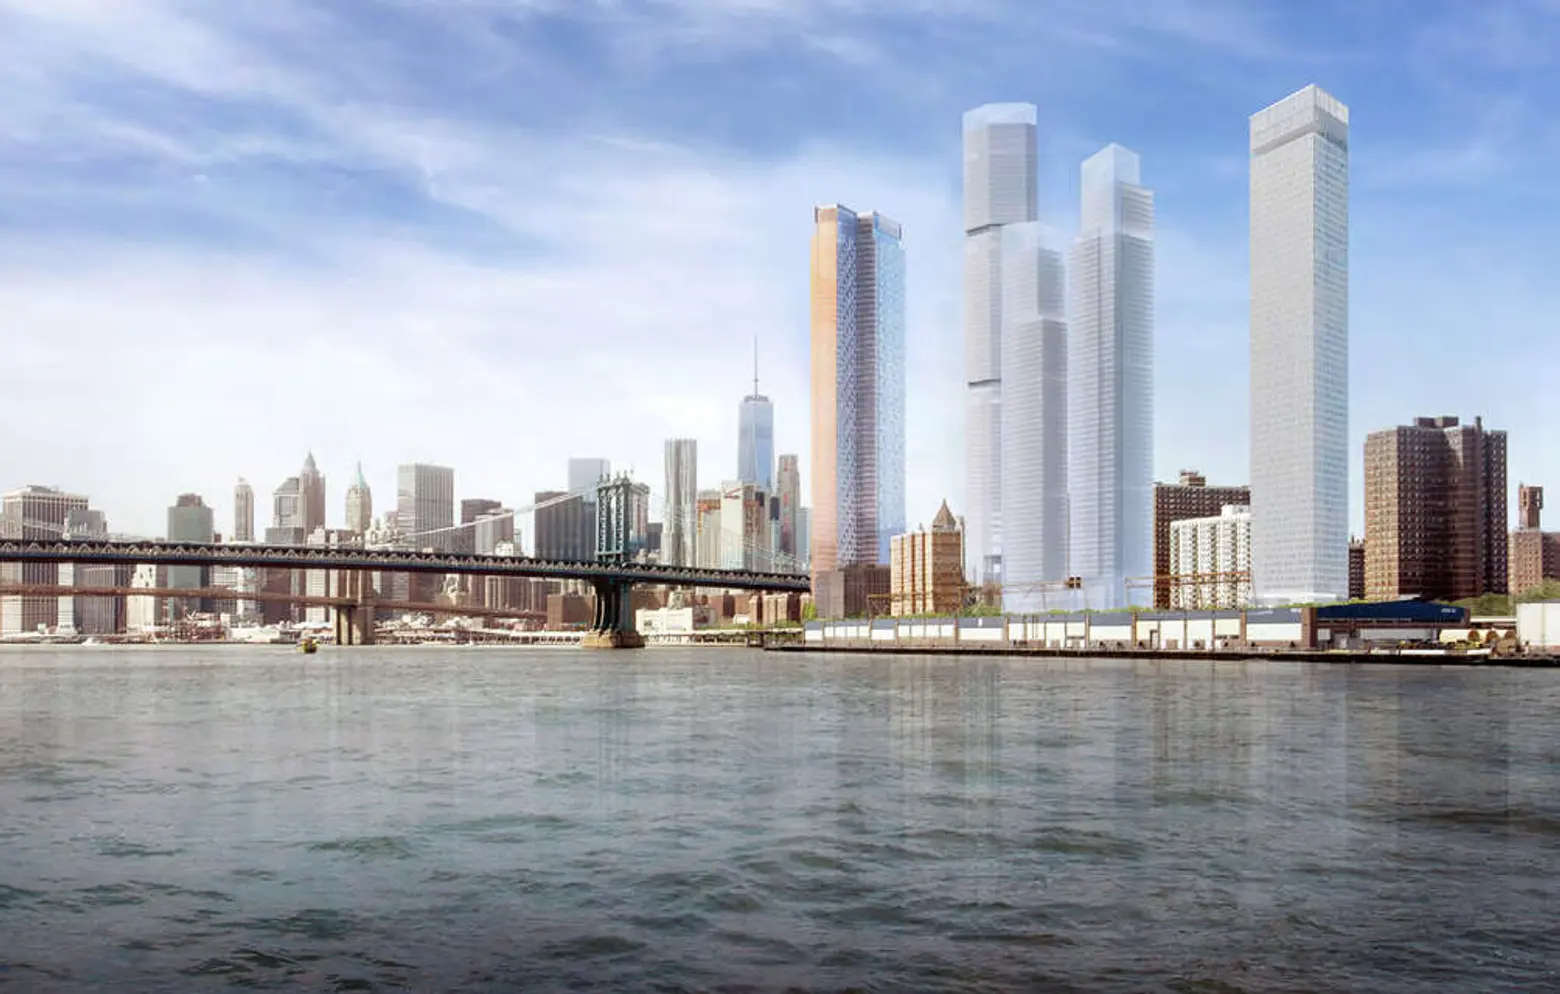 New court ruling may mean more delays for Lower East Side’s Two Bridges megaproject